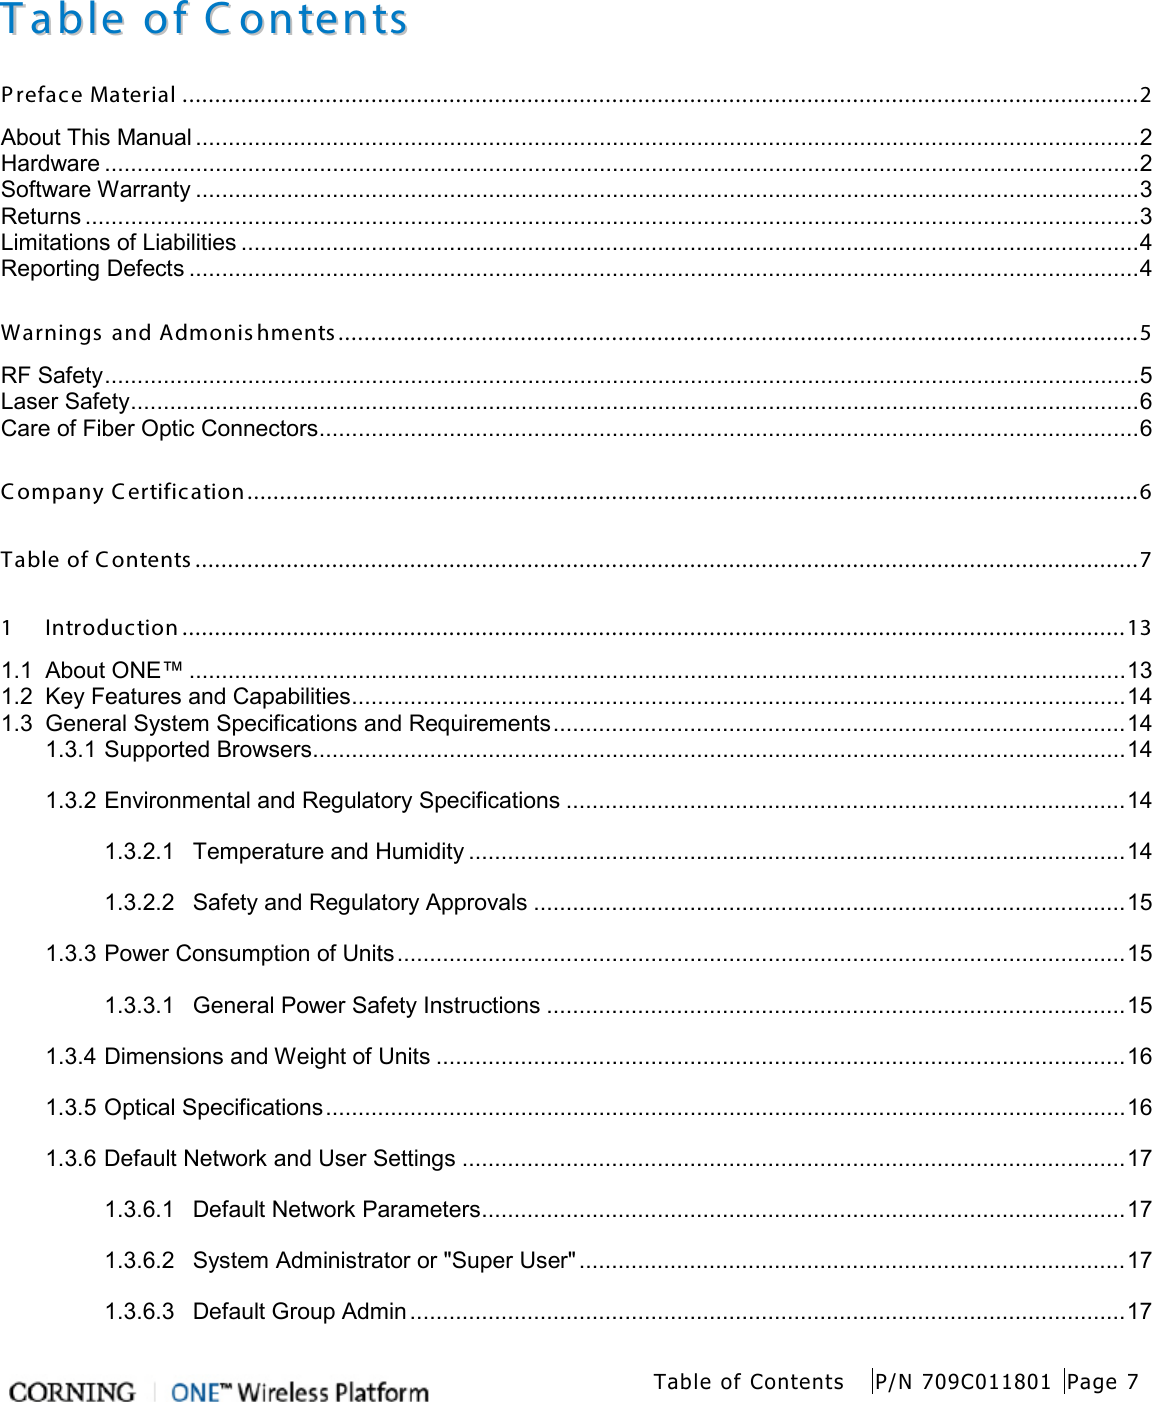   Table of Contents P/N 709C011801 Page 7   TTaabbllee  ooff  CCoonntteennttss  Preface Material ................................................................................................................................................... 2 About This Manual ................................................................................................................................................. 2 Hardware ............................................................................................................................................................... 2 Software Warranty ................................................................................................................................................. 3 Returns .................................................................................................................................................................. 3 Limitations of Liabilities .......................................................................................................................................... 4 Reporting Defects .................................................................................................................................................. 4 Warnings and Admonishments........................................................................................................................... 5 RF Safety ............................................................................................................................................................... 5 Laser Safety ........................................................................................................................................................... 6 Care of Fiber Optic Connectors .............................................................................................................................. 6 C ompany C ertification ......................................................................................................................................... 6 Table of Contents  ................................................................................................................................................. 7 1 Introduction ................................................................................................................................................. 13 1.1 About ONE™ ................................................................................................................................................ 13 1.2 Key Features and Capabilities ....................................................................................................................... 14 1.3 General System Specifications and Requirements ........................................................................................ 14 1.3.1 Supported Browsers ............................................................................................................................. 14 1.3.2 Environmental and Regulatory Specifications ...................................................................................... 14 1.3.2.1 Temperature and Humidity ..................................................................................................... 14 1.3.2.2 Safety and Regulatory Approvals ........................................................................................... 15 1.3.3 Power Consumption of Units ................................................................................................................ 15 1.3.3.1 General Power Safety Instructions ......................................................................................... 15 1.3.4 Dimensions and Weight of Units .......................................................................................................... 16 1.3.5 Optical Specifications ........................................................................................................................... 16 1.3.6 Default Network and User Settings ...................................................................................................... 17 1.3.6.1 Default Network Parameters ................................................................................................... 17 1.3.6.2 System Administrator or &quot;Super User&quot; .................................................................................... 17 1.3.6.3 Default Group Admin .............................................................................................................. 17 